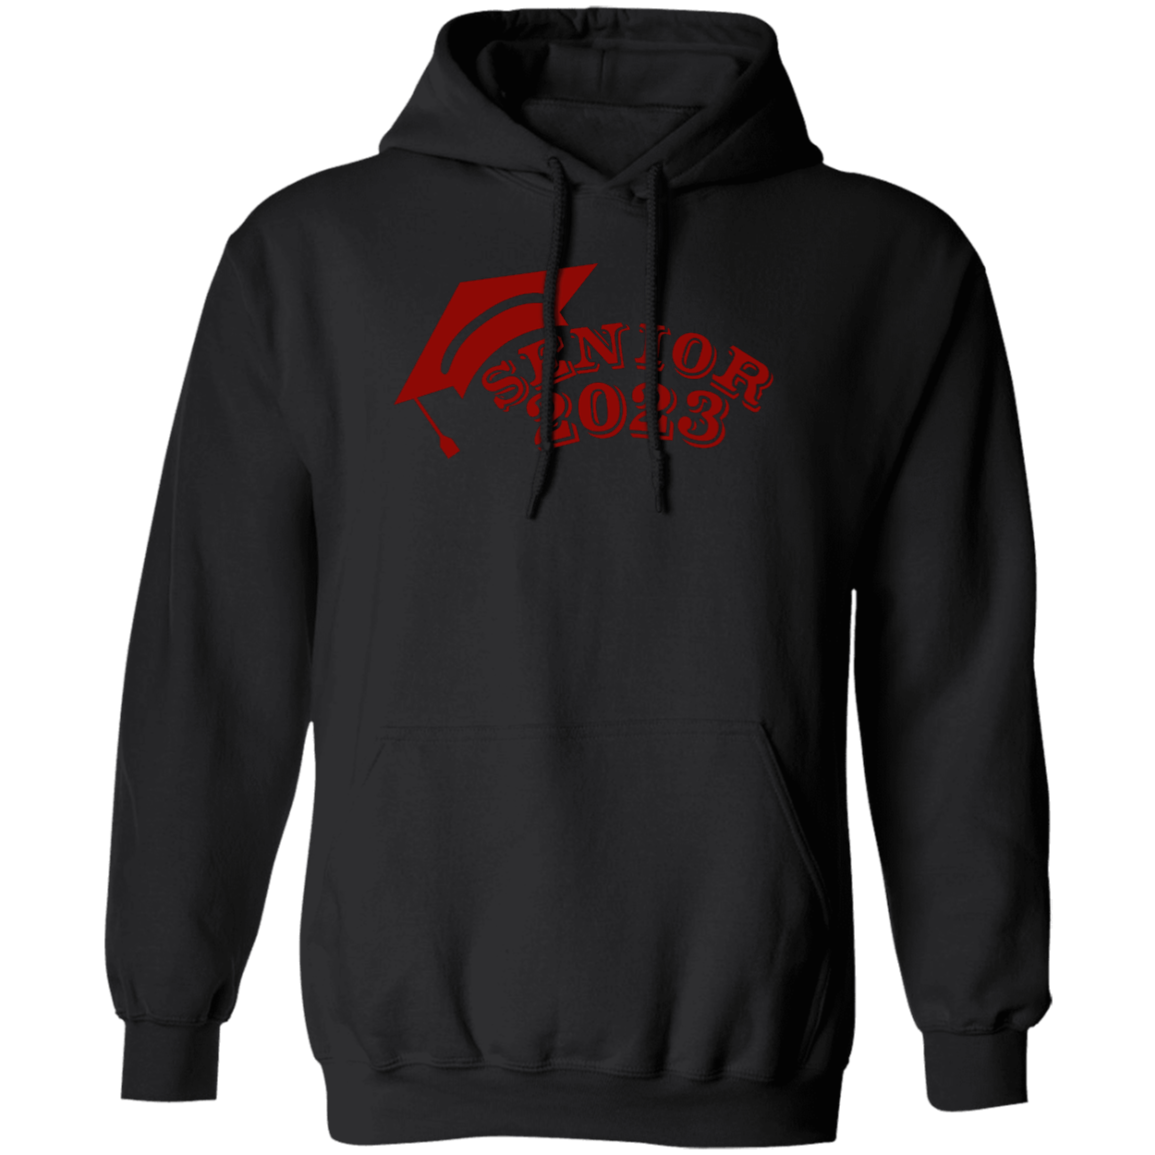 2023 Red Pullover Hoodie